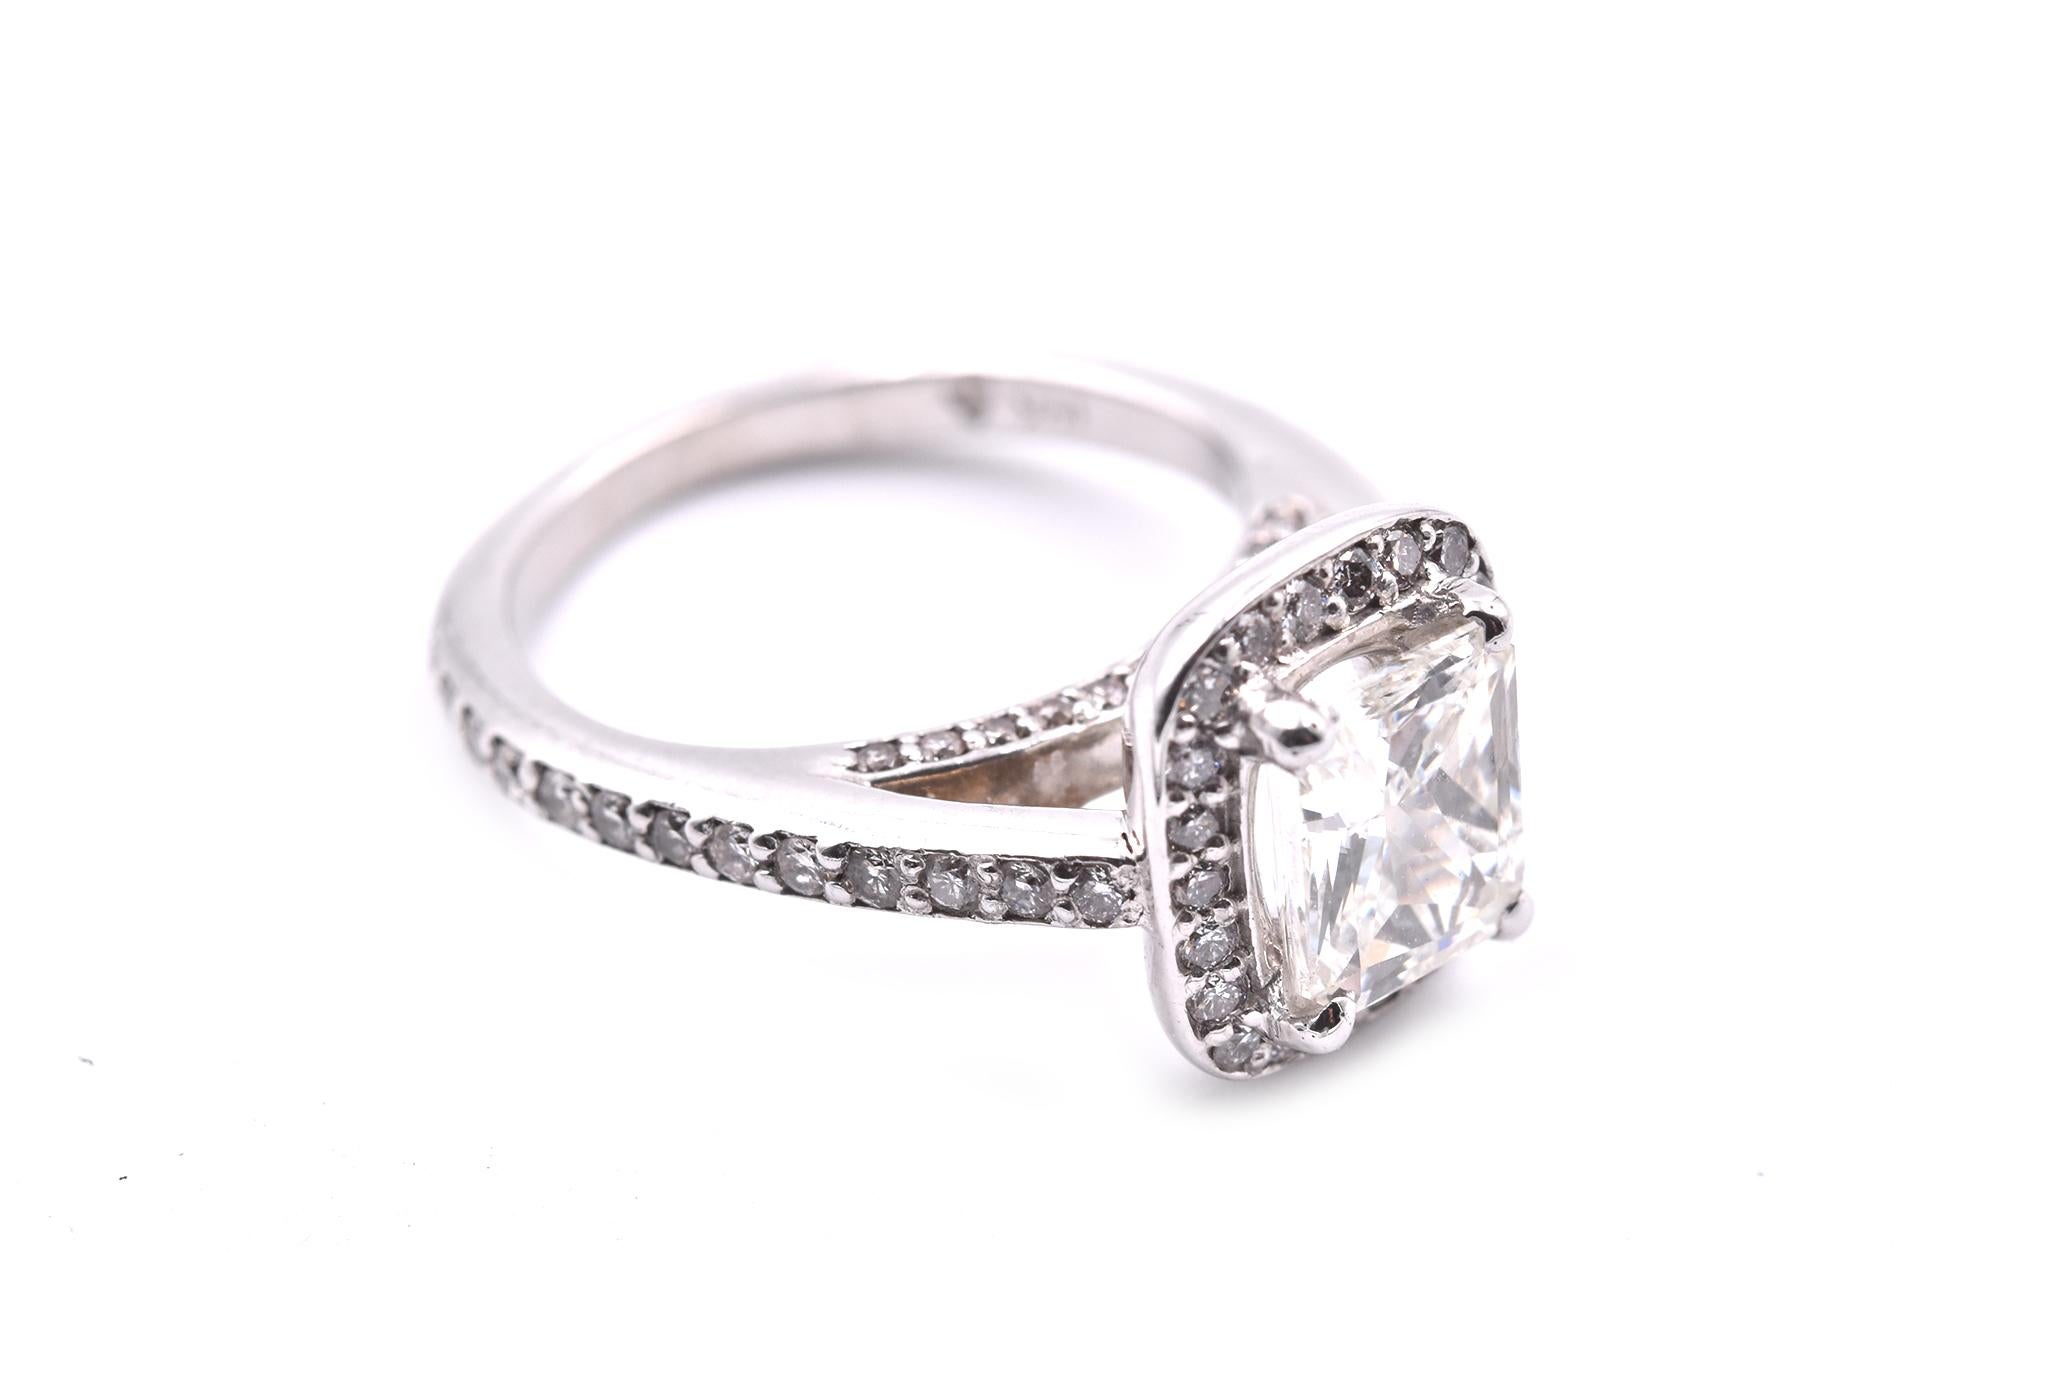 Designer: custom design
Material: 14k white gold
Center Diamond: 1 radiant cut= 1.04 EGL 918516328D
Color: H
Clarity: VS2
Diamonds: round brilliant cut= 0.72cttw
Color: G
Clarity: VS
Ring size: 4 ½ (please allow two additional shipping days for